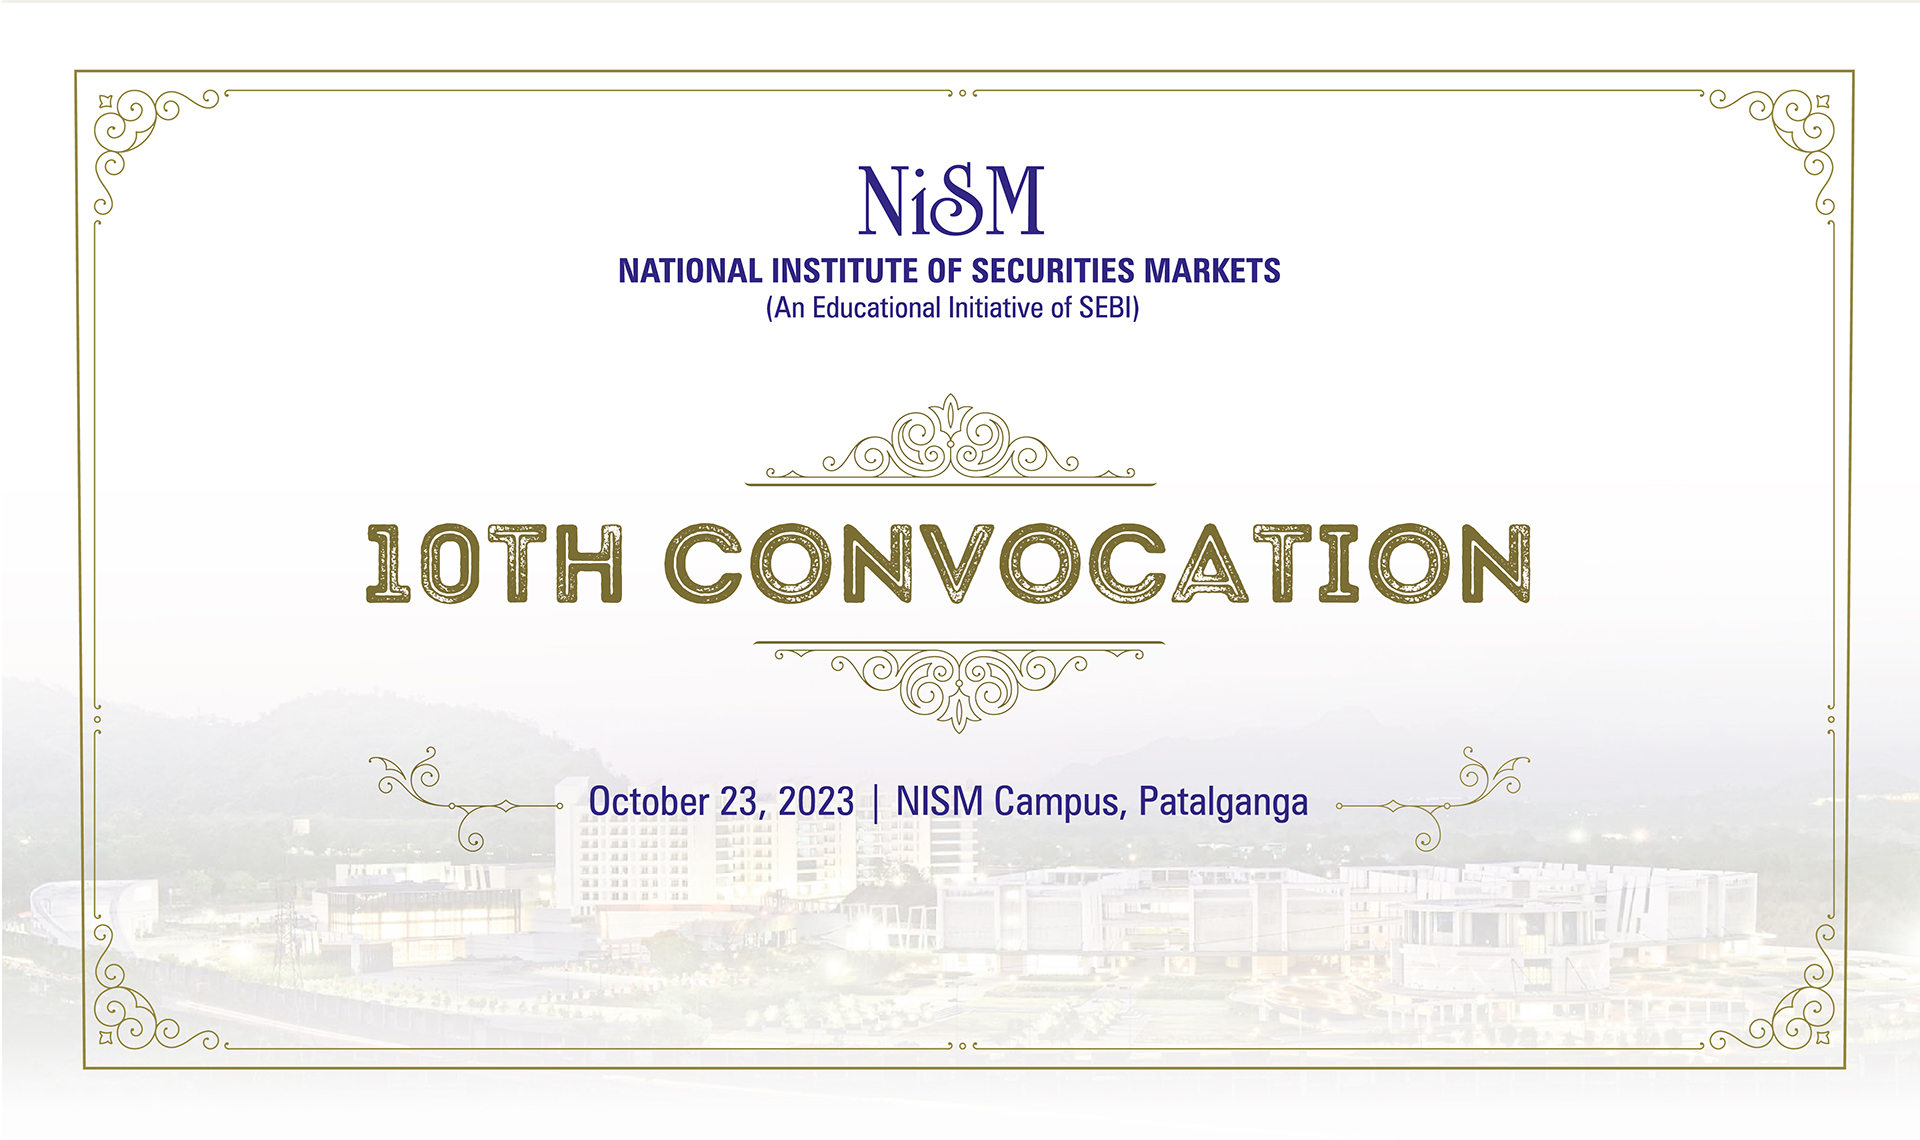 NISM hosted its 10th Convocation on October 23, 2023 at NISM Campus, Patalganga